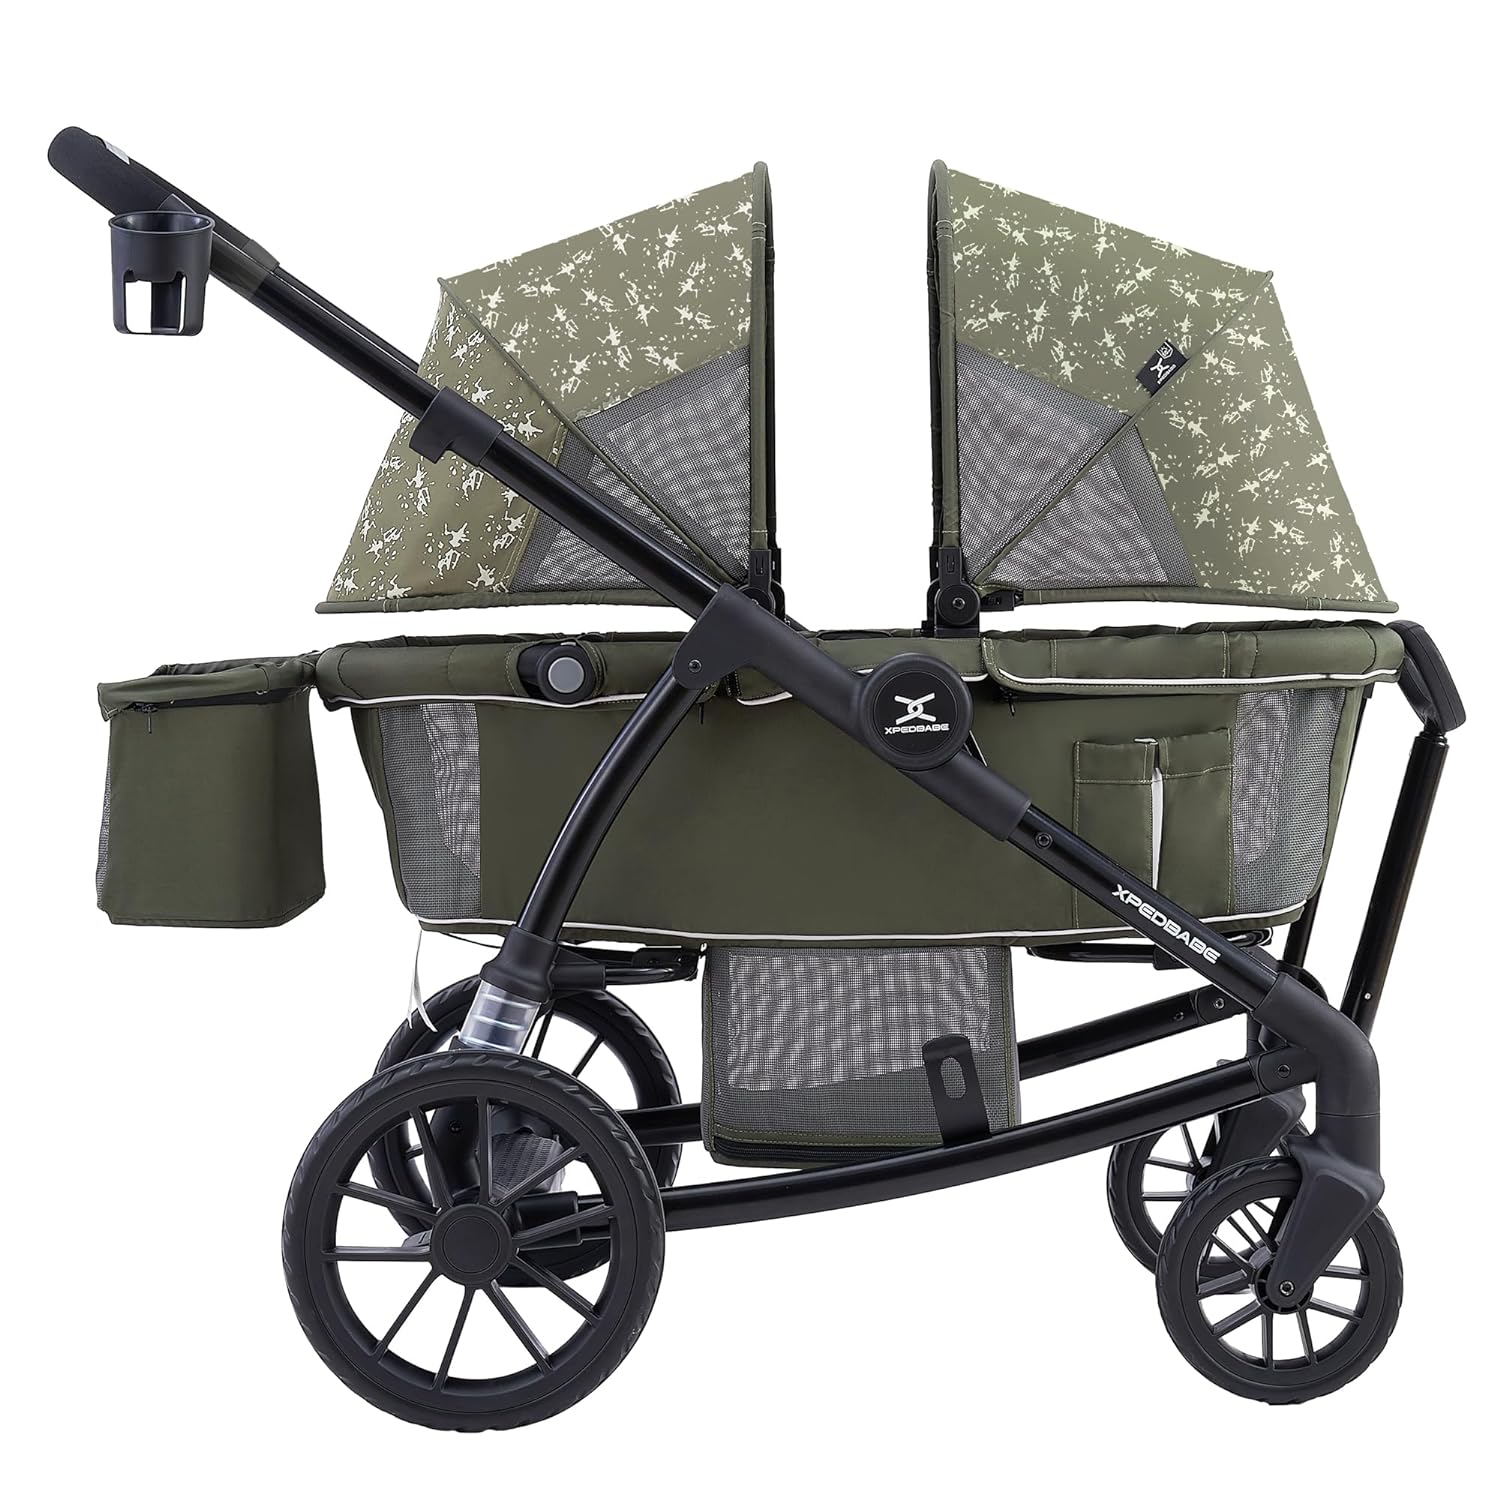 Xped Babe All-Terrain Wagon Stroller Review